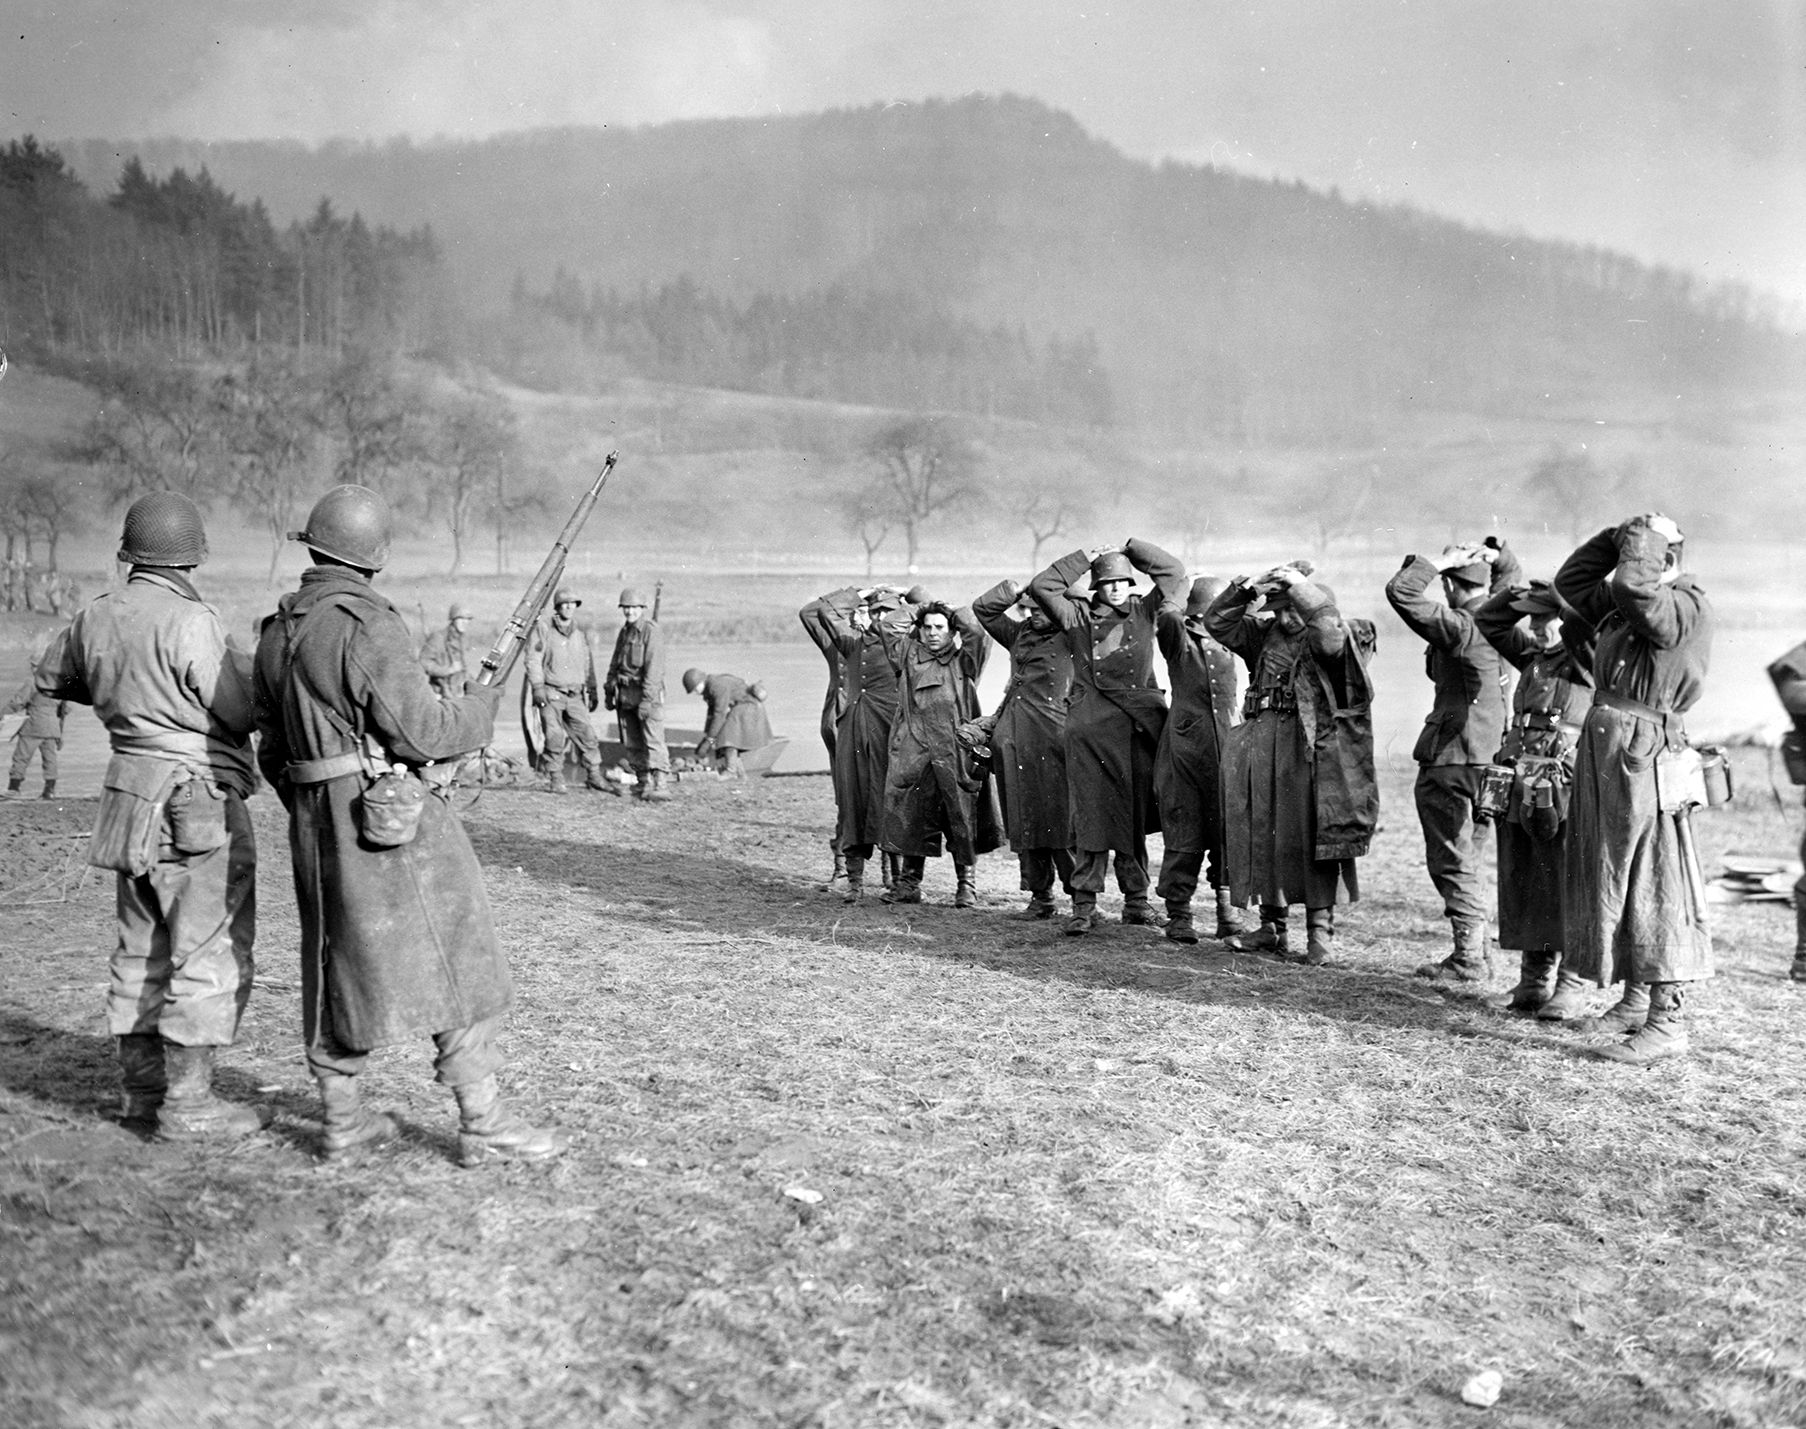 German prisoners, under the watch of American soldiers of the 5th Infantry Division, place their hands on their heads and await instructions. These Germans were taken prisoner near the city of Echternach, Luxembourg. 